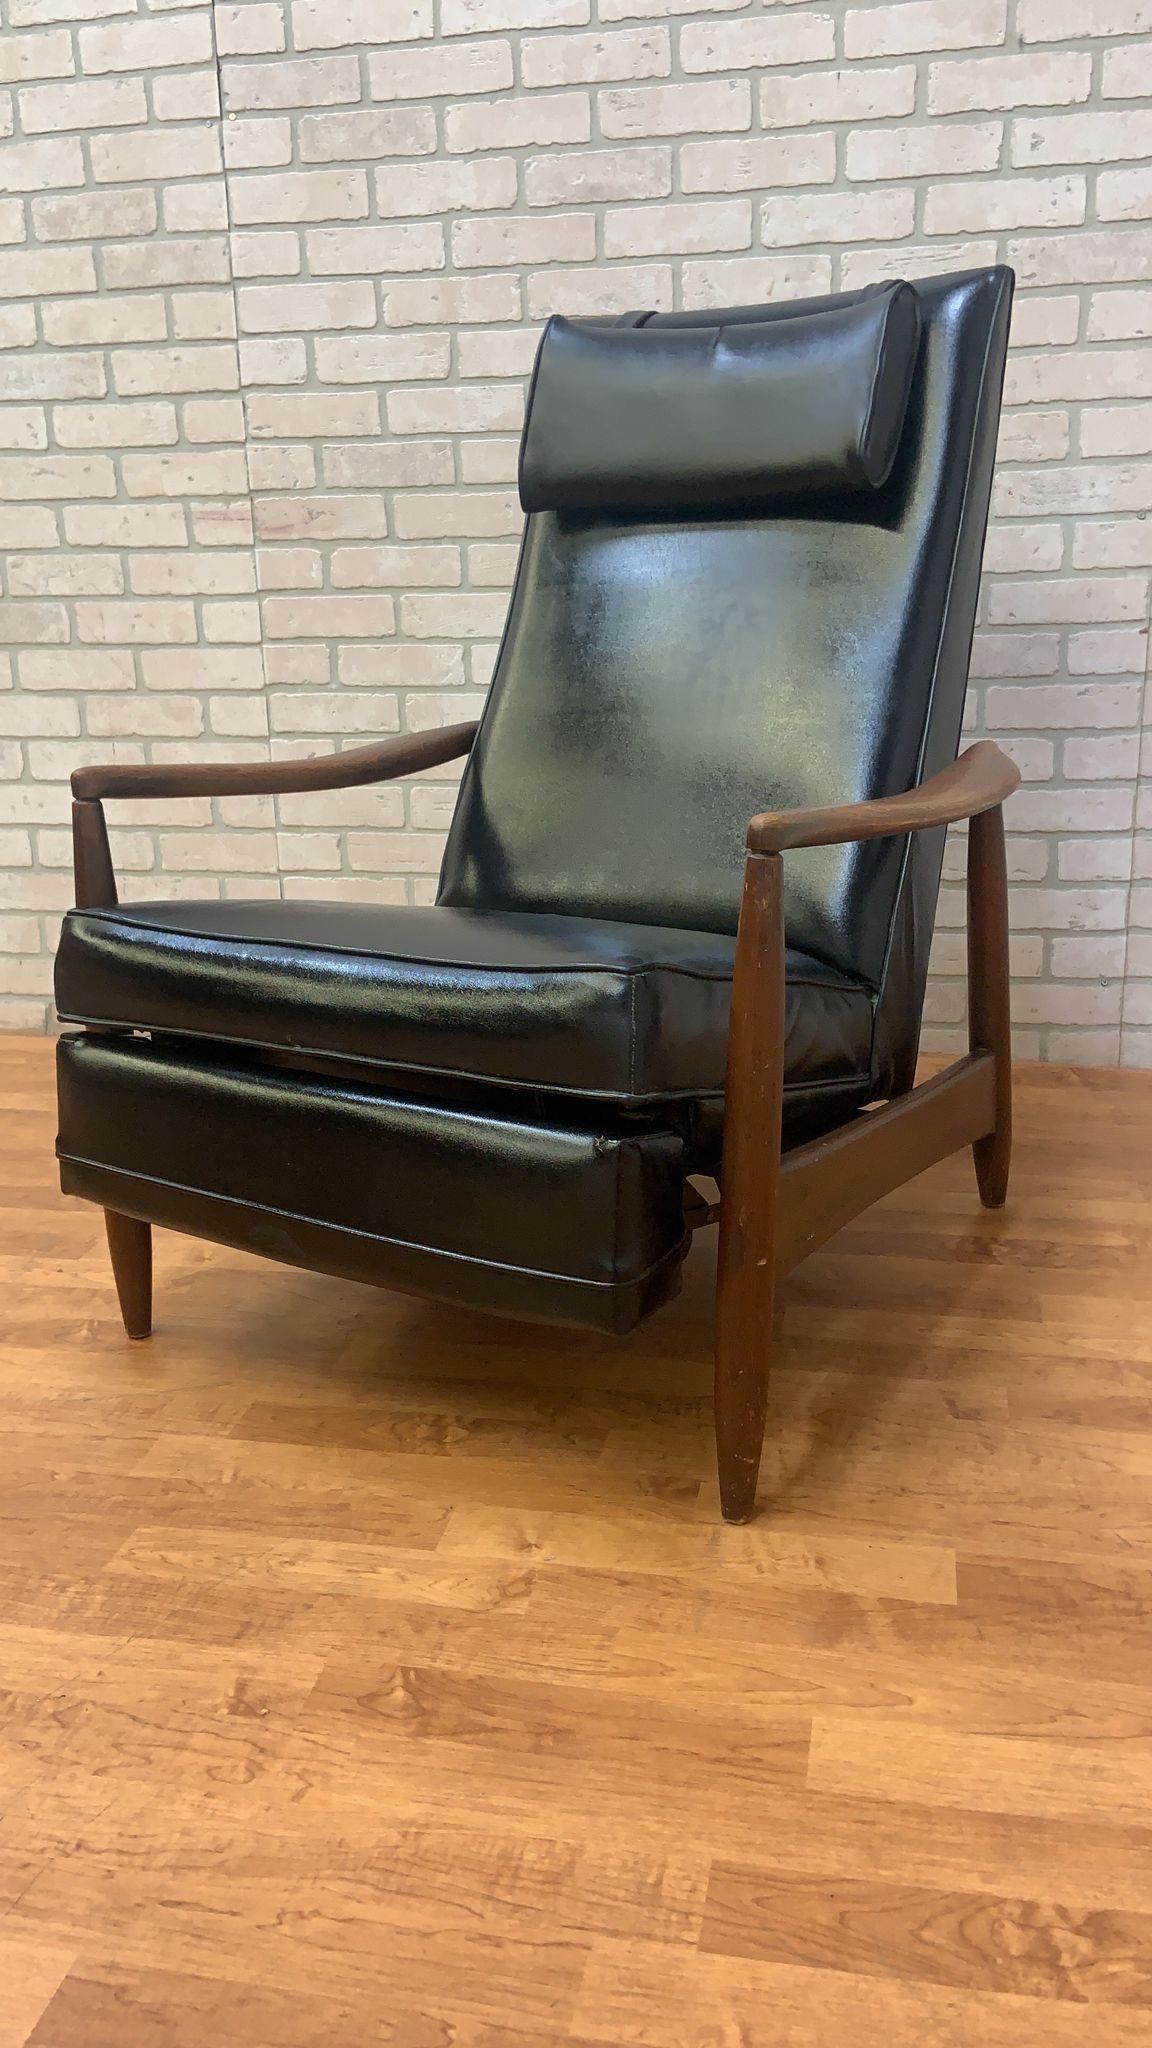 MCM Milo Baughman Style Aston Re-Invented Recliner in Black Leather In Good Condition For Sale In Chicago, IL